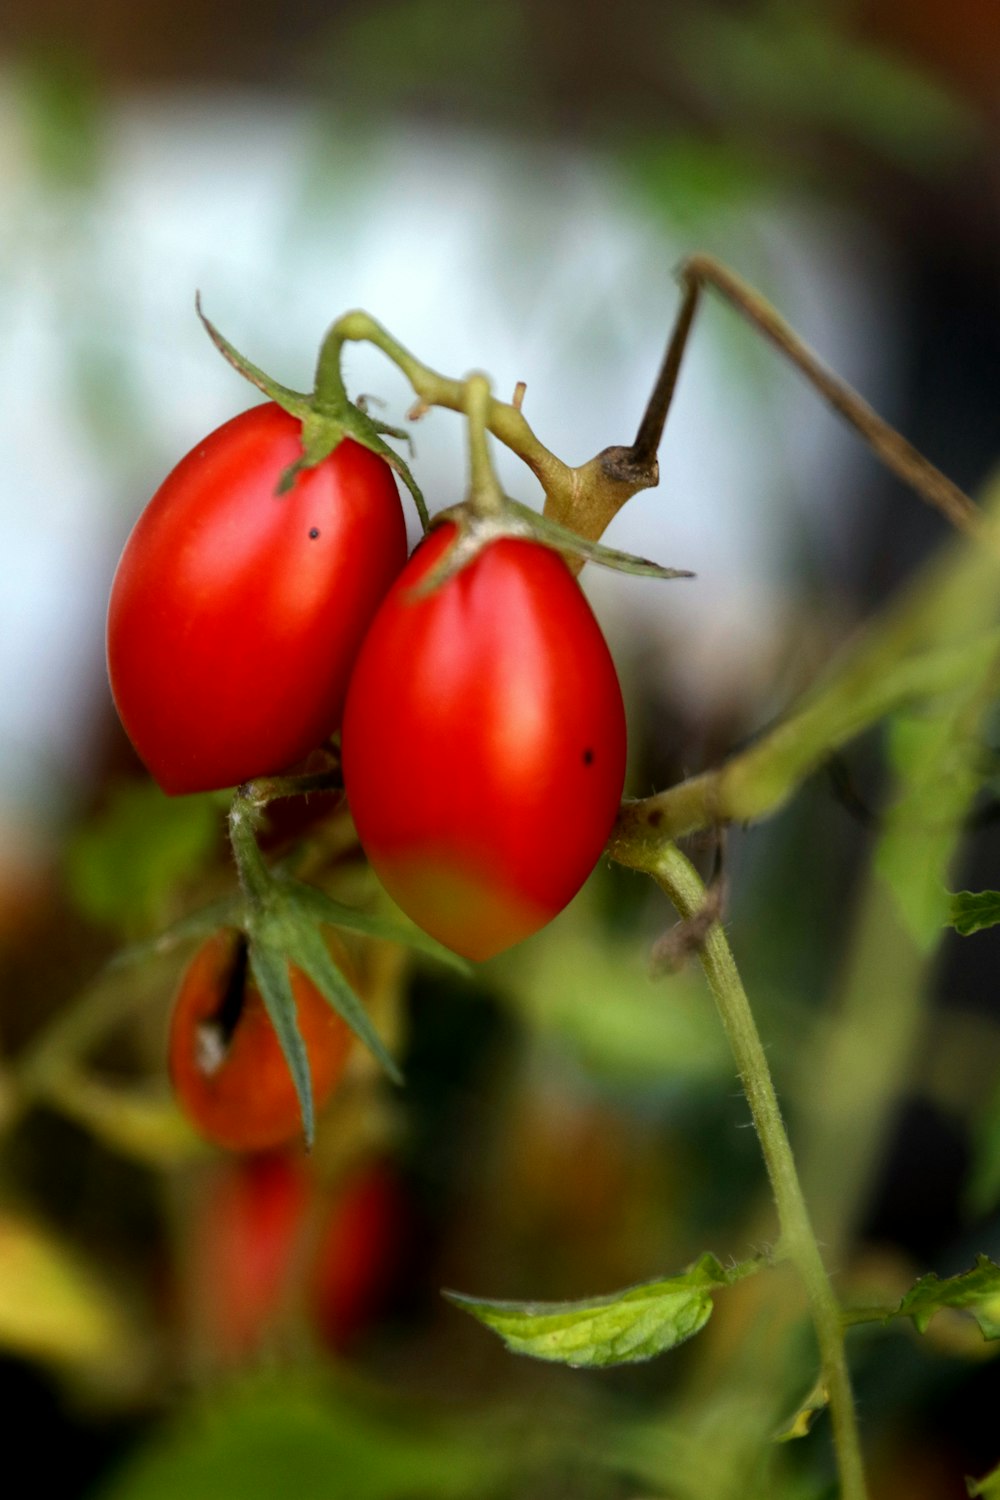 a close-up of some tomatoes